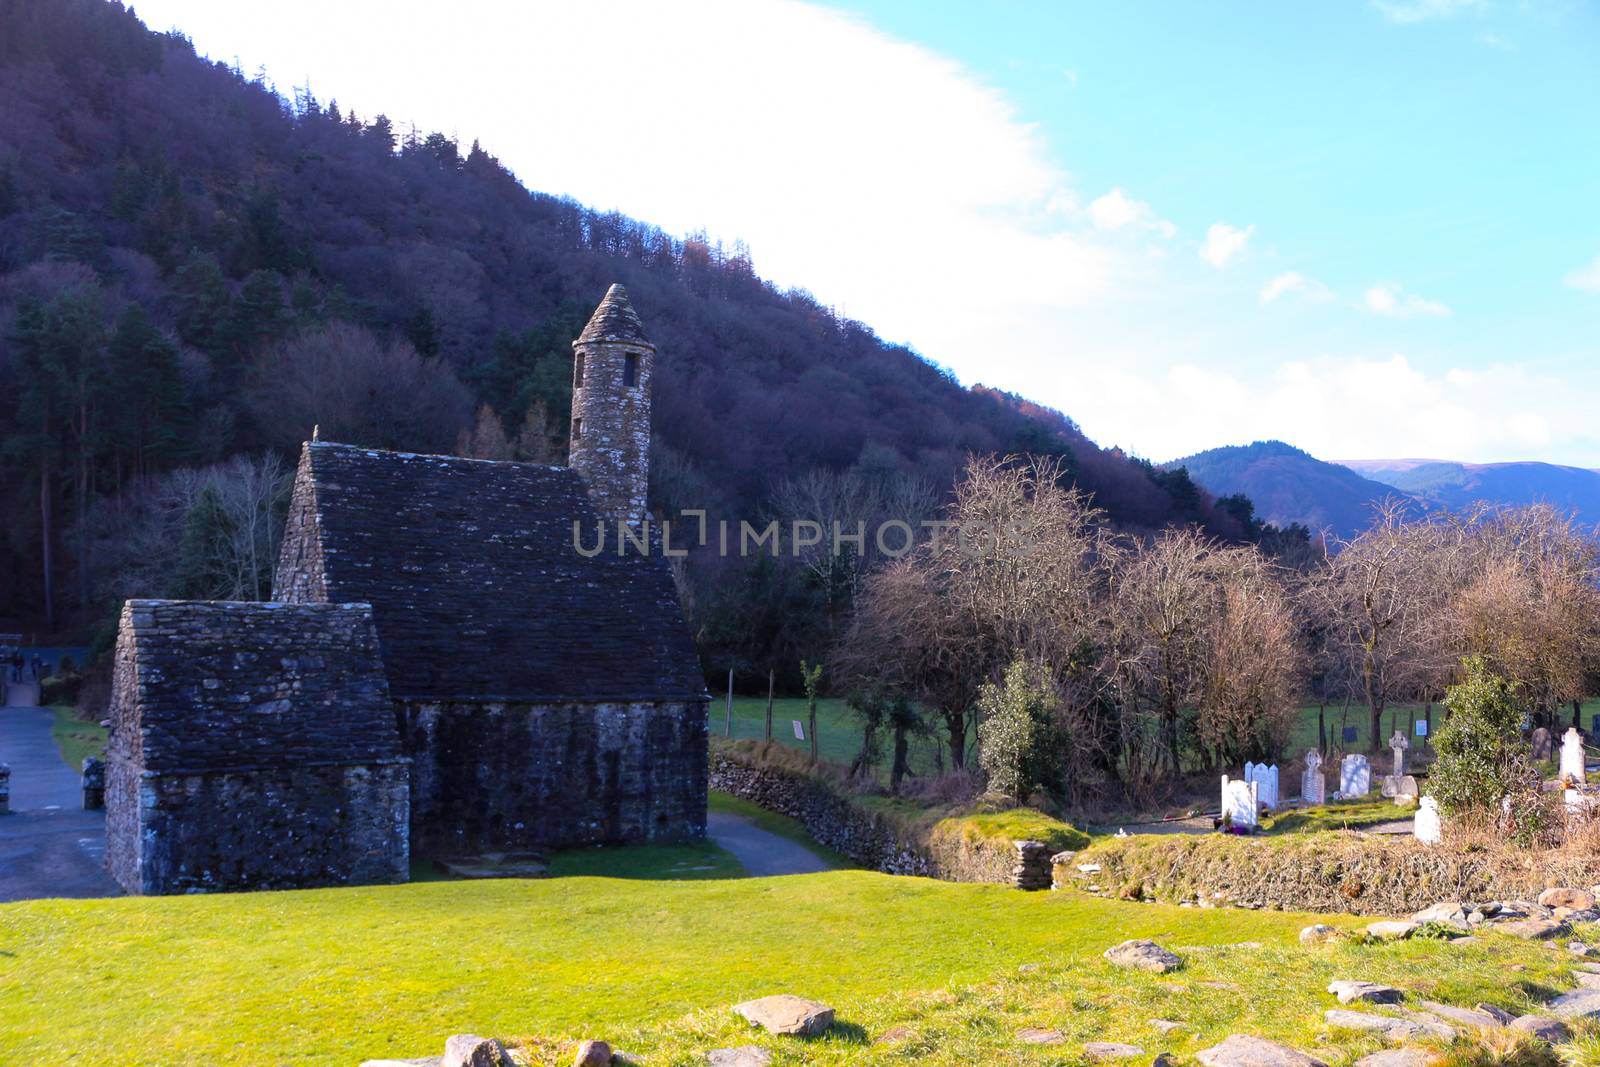  A small ruin house in the Glendalough valley in Wicklow mountains. Historic European site. by mynewturtle1